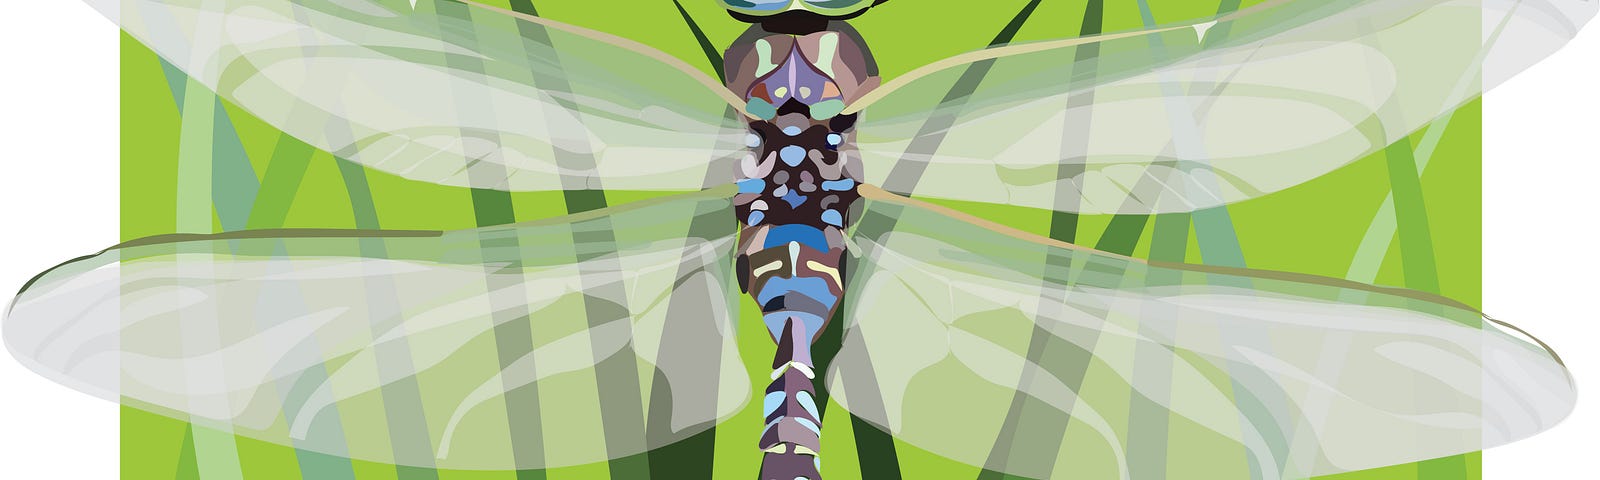 digital depiction of a dragonfly showing it on a blade of grass with wings stretched outwards.